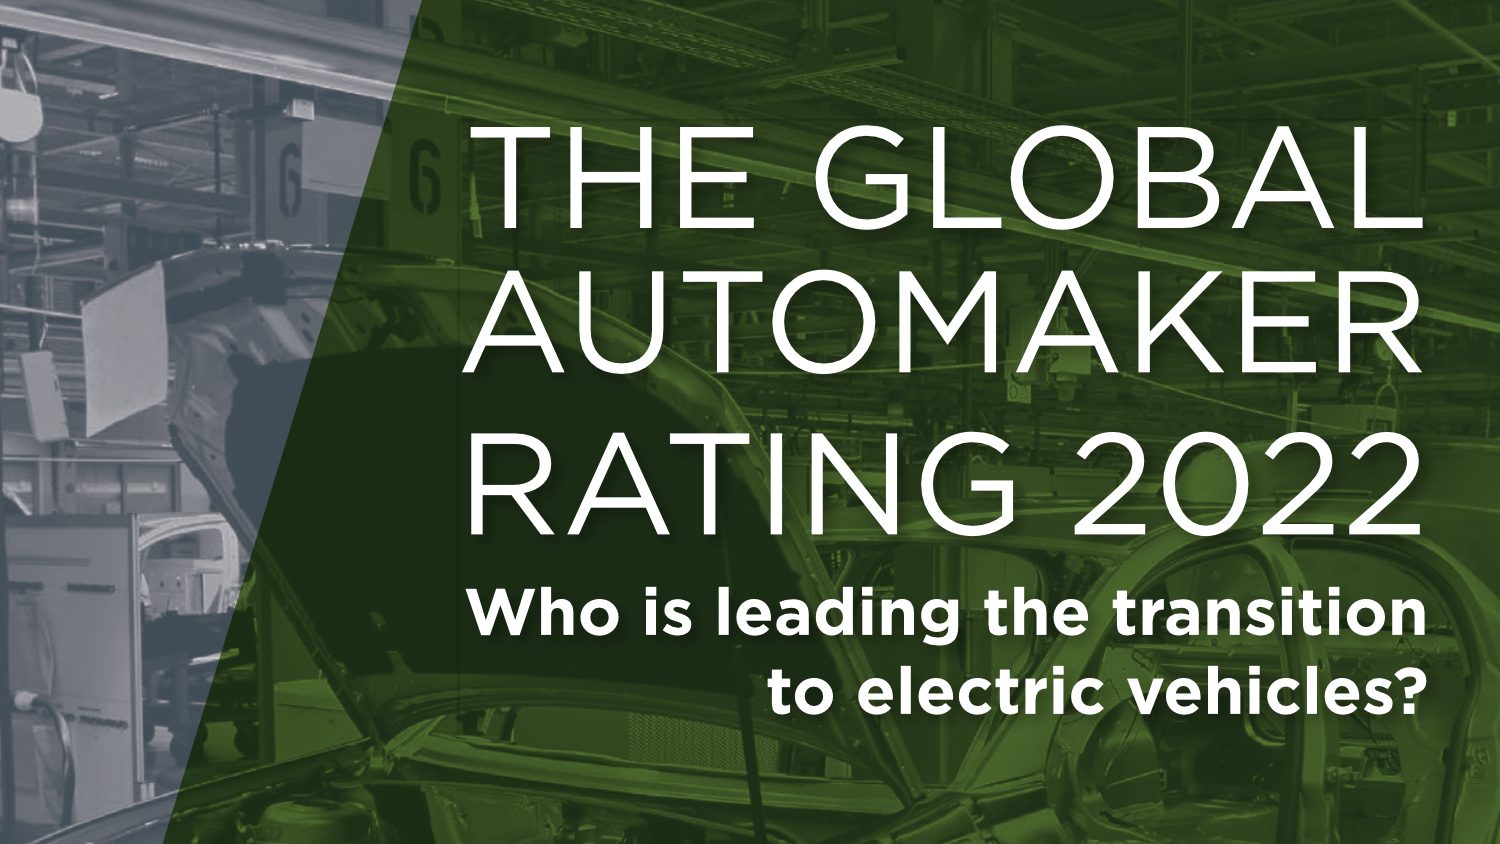 The Global Automaker Rating 2022 Who is leading the transition to